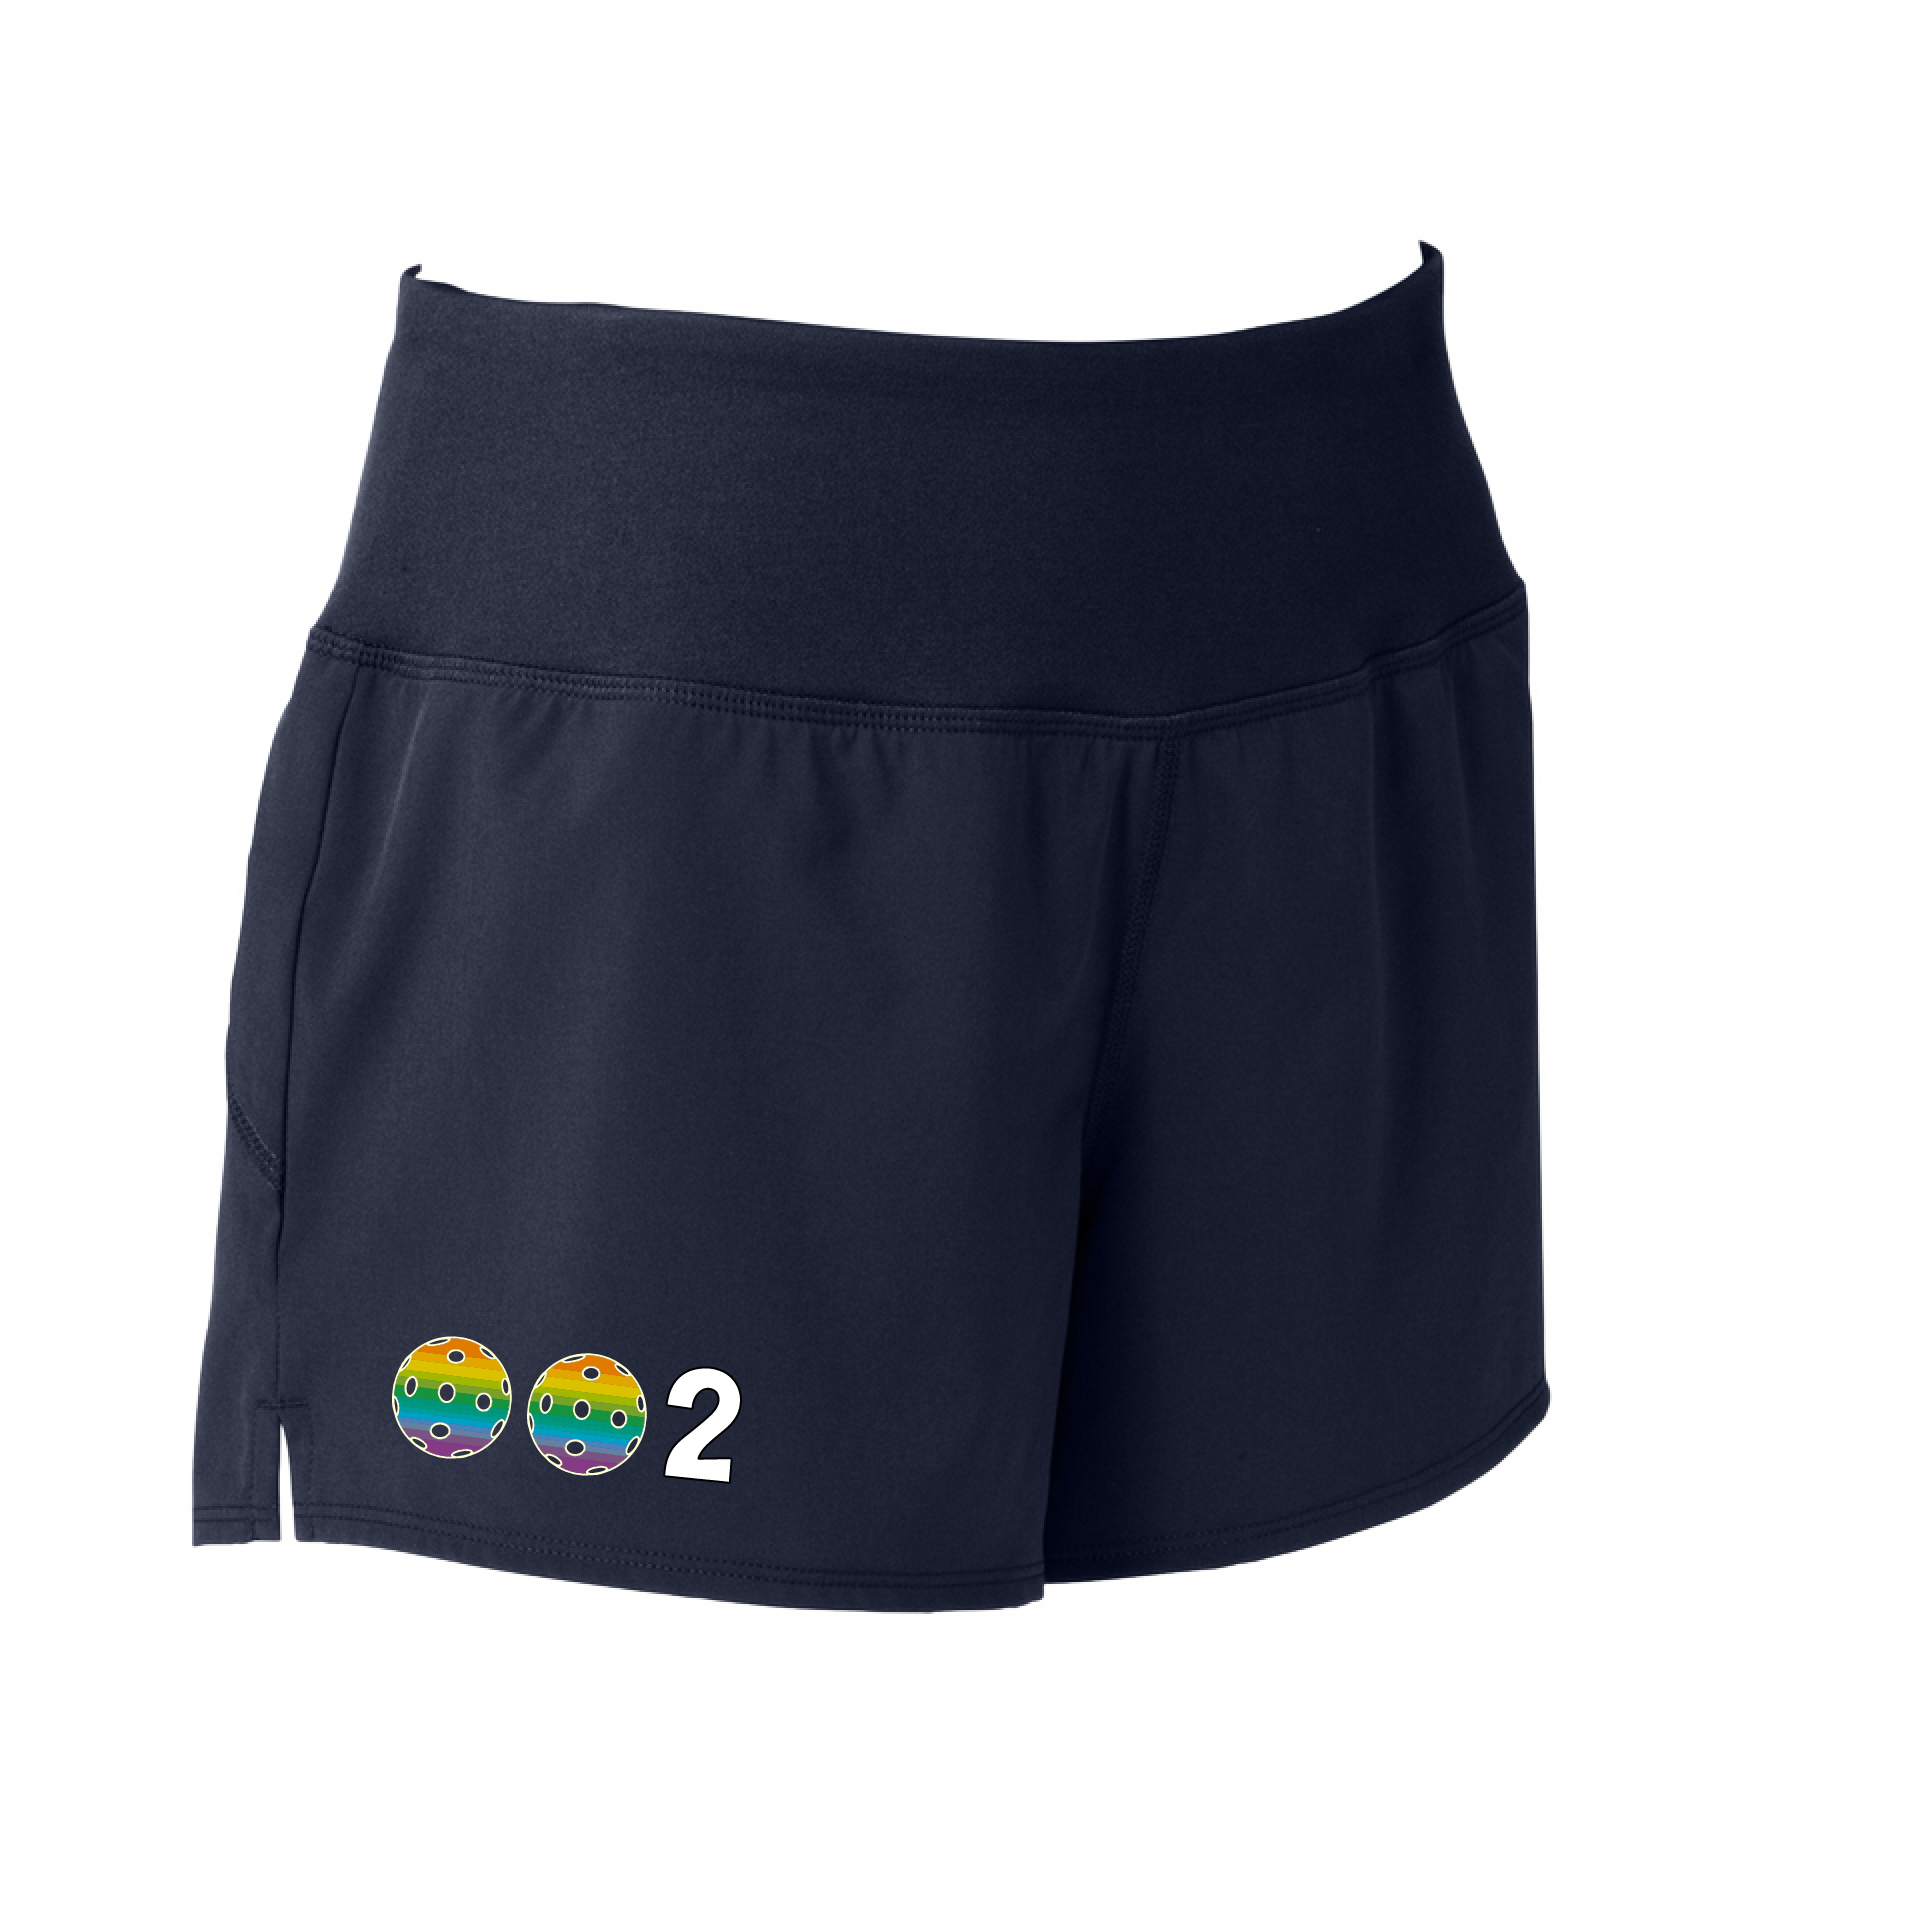 Designs: 002 with customizable Pickleballs (Cyan, Orange, Purple, Rainbow.)  Sport Tek women’s repeat shorts come with built-in cell phone pocket on the exterior of the waistband. You can also feel secure knowing that no matter how strenuous the exercise, the shorts will remain in place (it won’t ride up!). These shorts are extremely versatile and trendy. Transition from the Pickleball court to running errands smoothly.